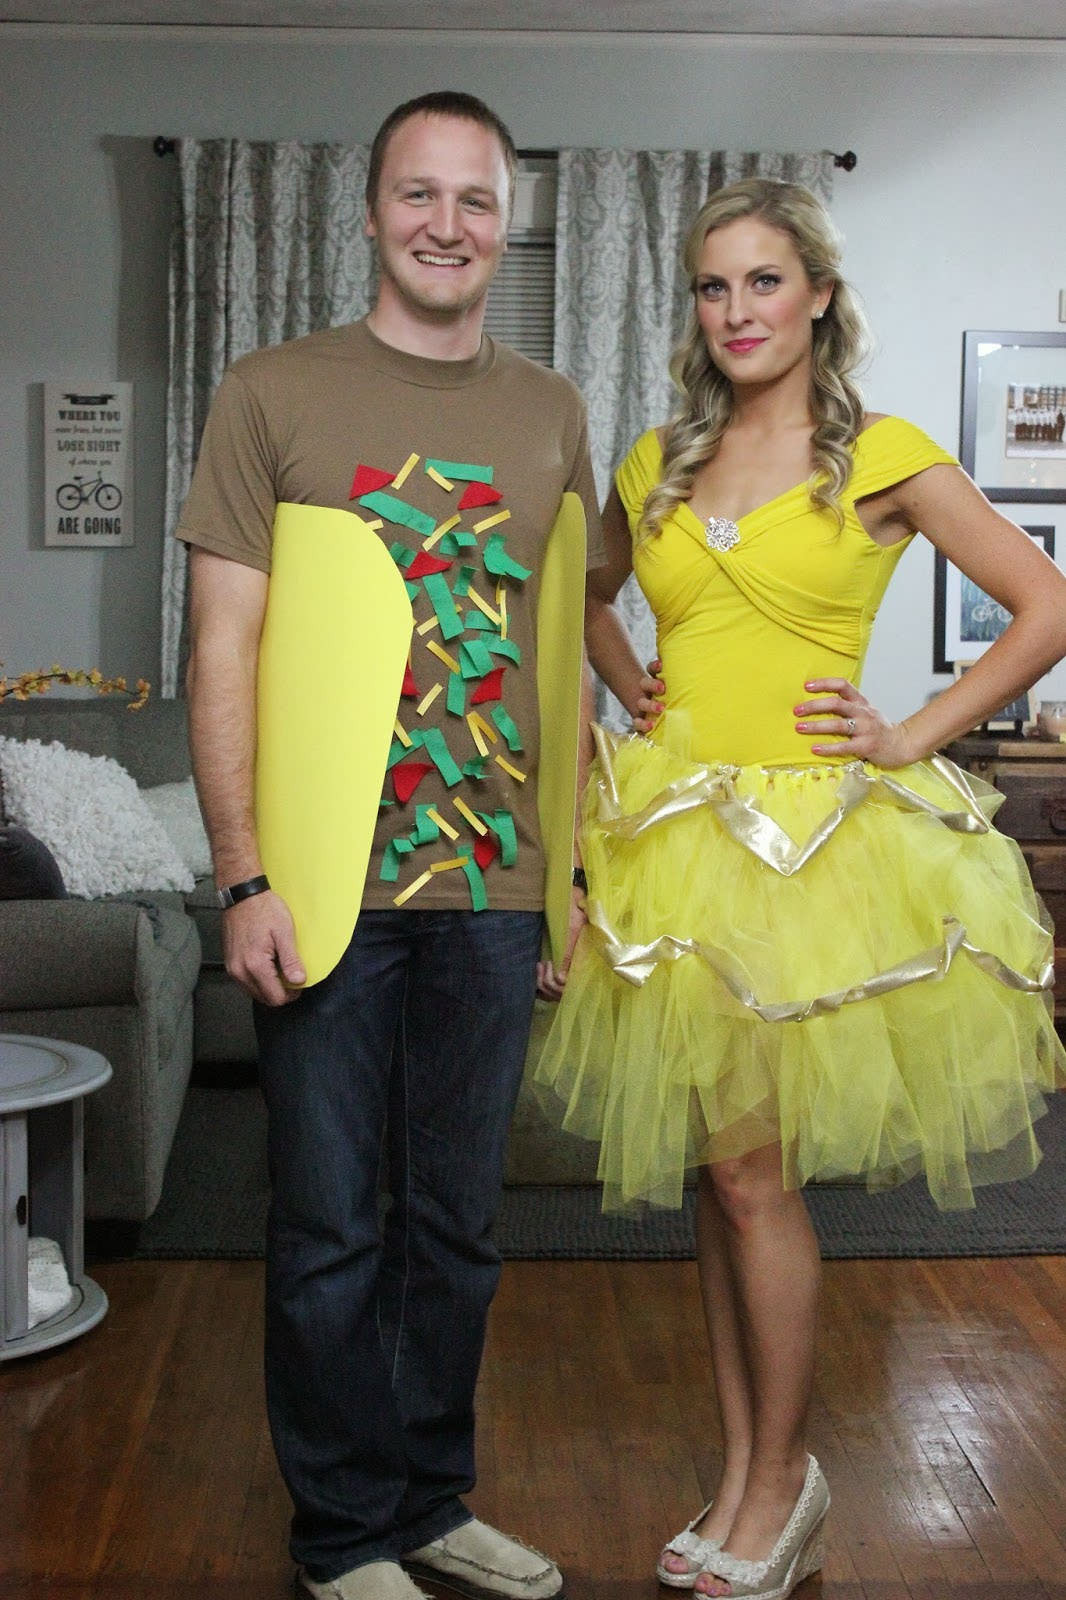 Couple Halloween Costumes Ideas DIY
 15 DIY Couples and Family Halloween Costumes